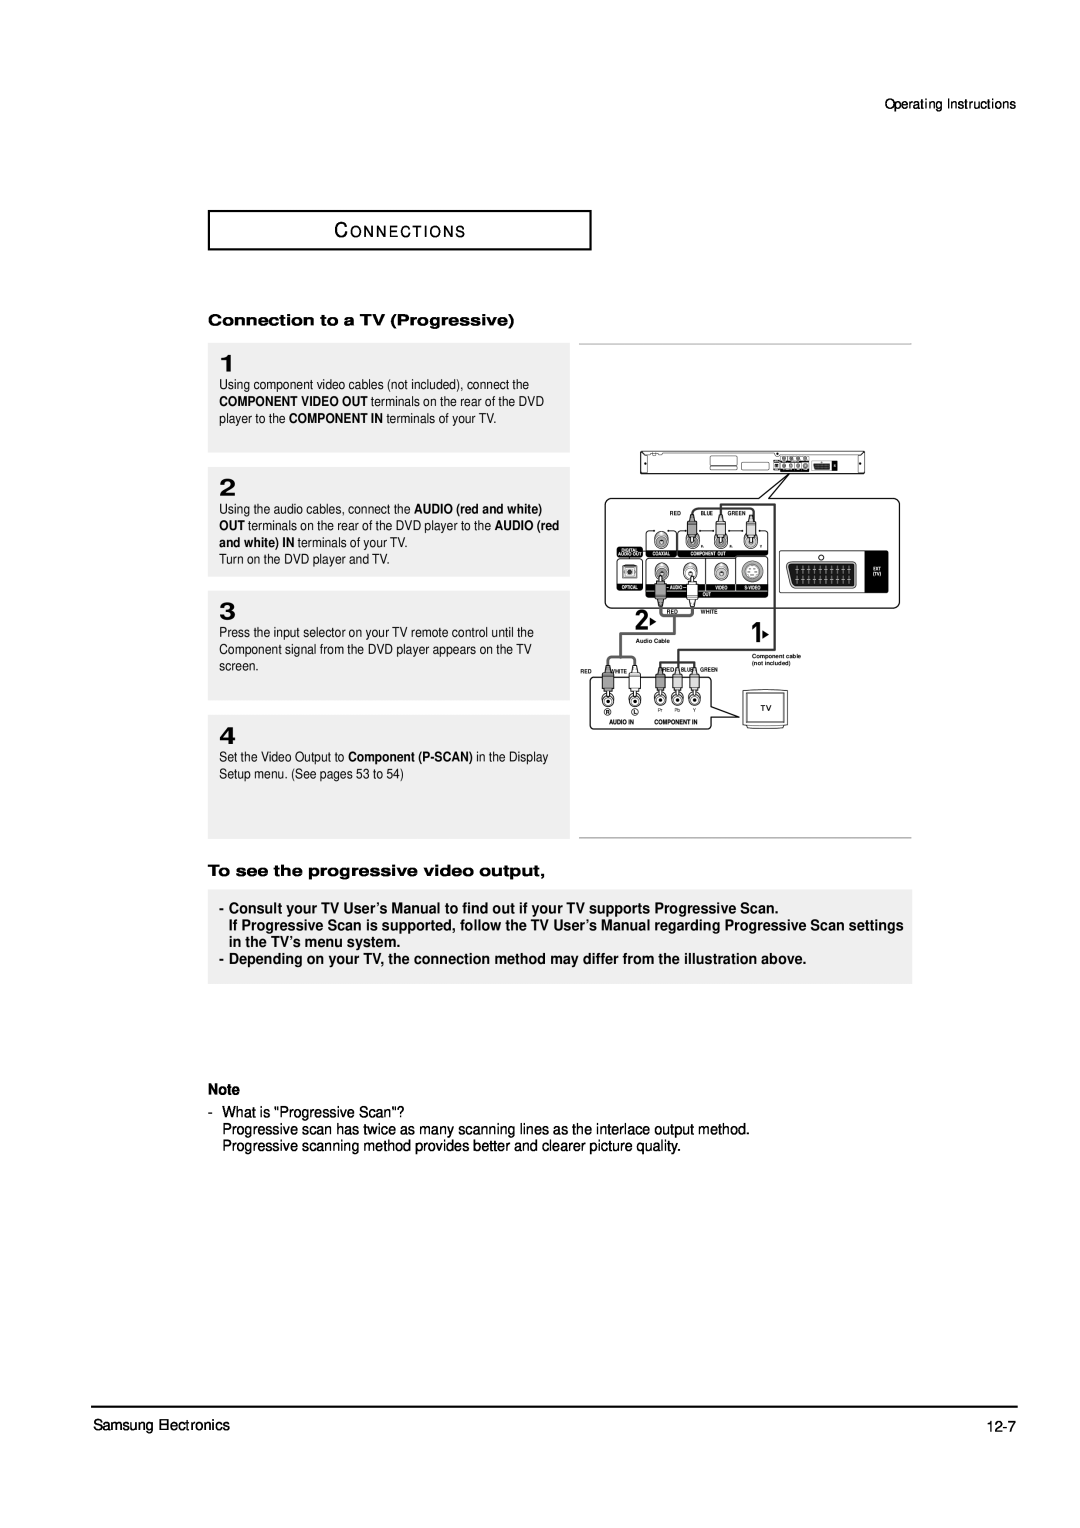 Samsung DVD-P355B/XET Operating Instructions, Connection to a TV Progressive, To see the progressive video output 